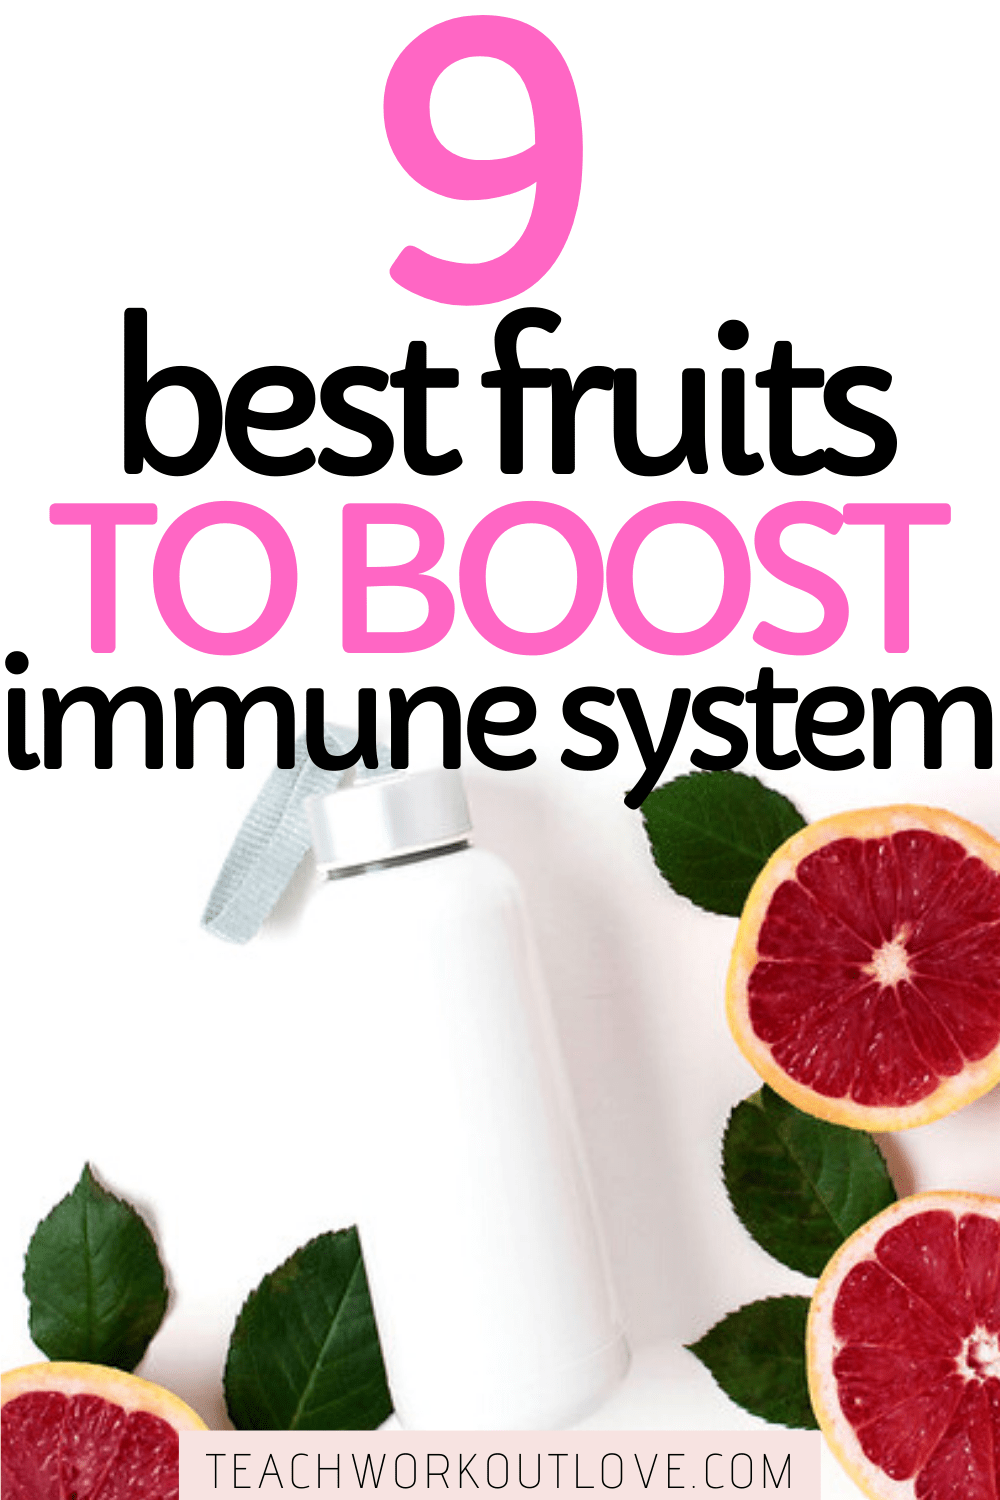 What can we do to boost the immune system and stay healthy? Add these fruits to your healthy diet for your family to boost your immune system.